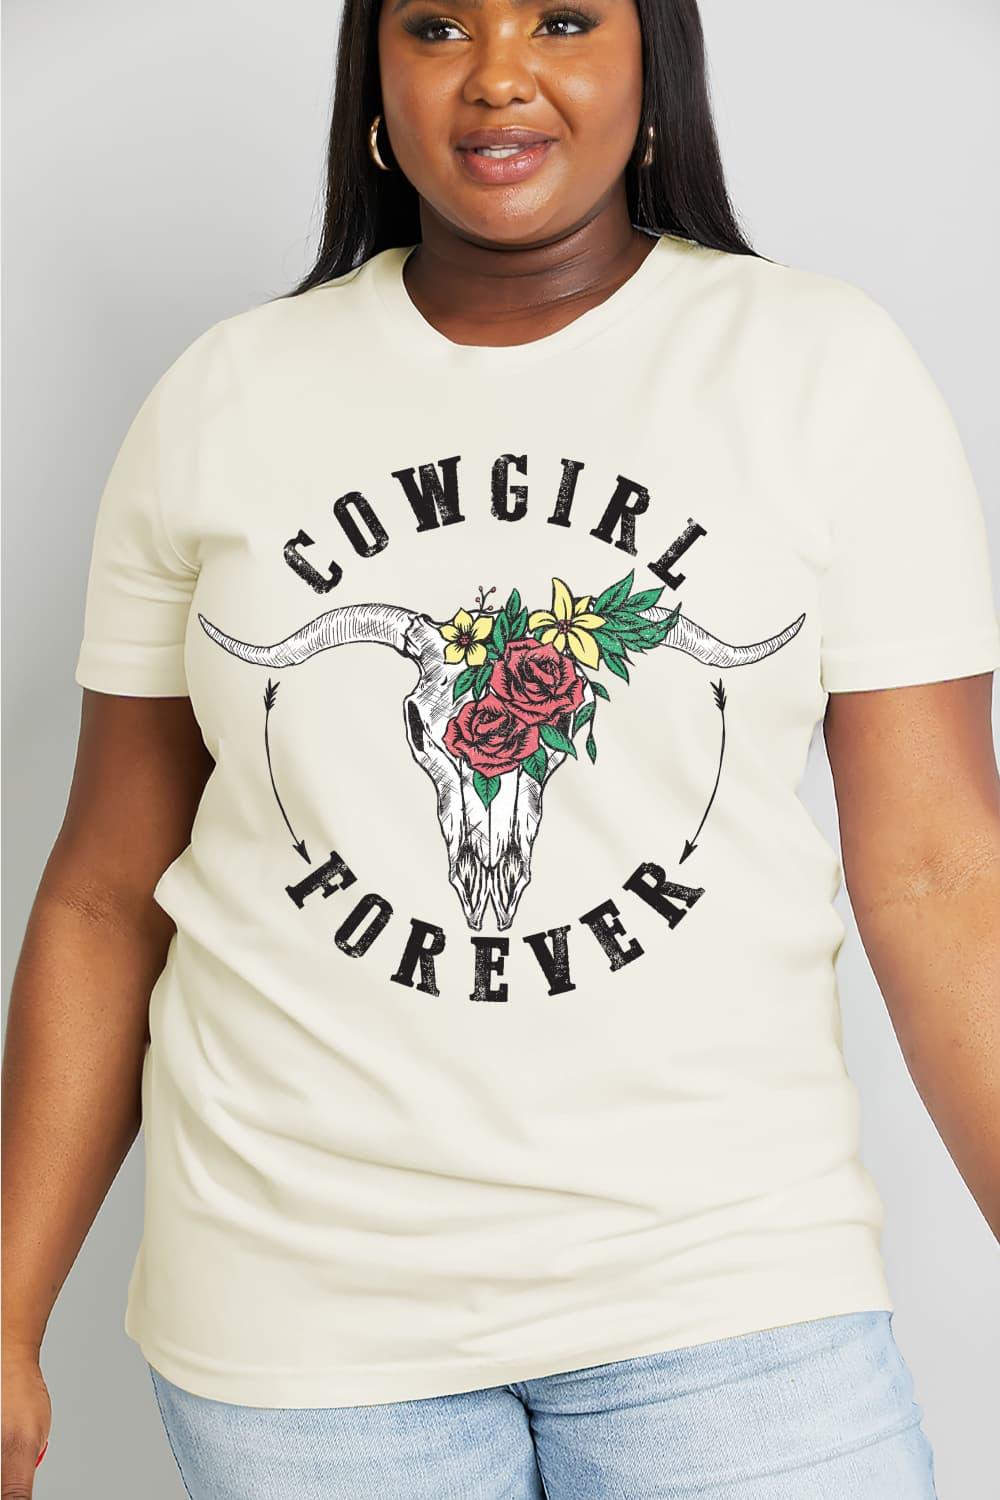 Full Size COWGIRL FOREVER Graphic Tee - Olive Ave